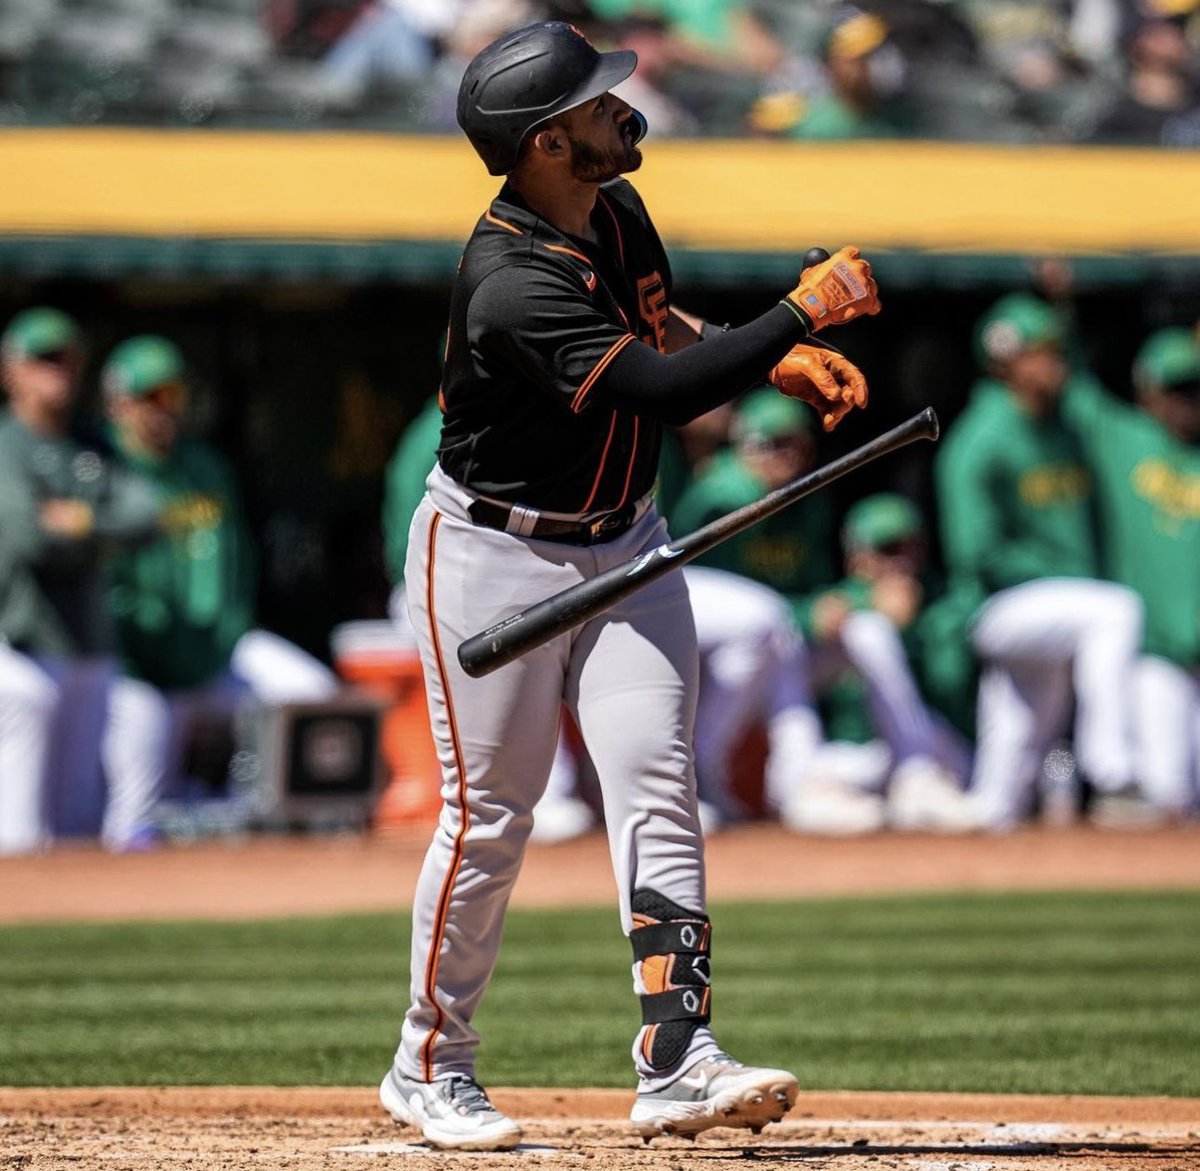 Cover Photo of the Day: @MLB - Courtesy of the @SFGiants #SFGiants #ResilientSF #SanFrancisco #MLB #Baseball